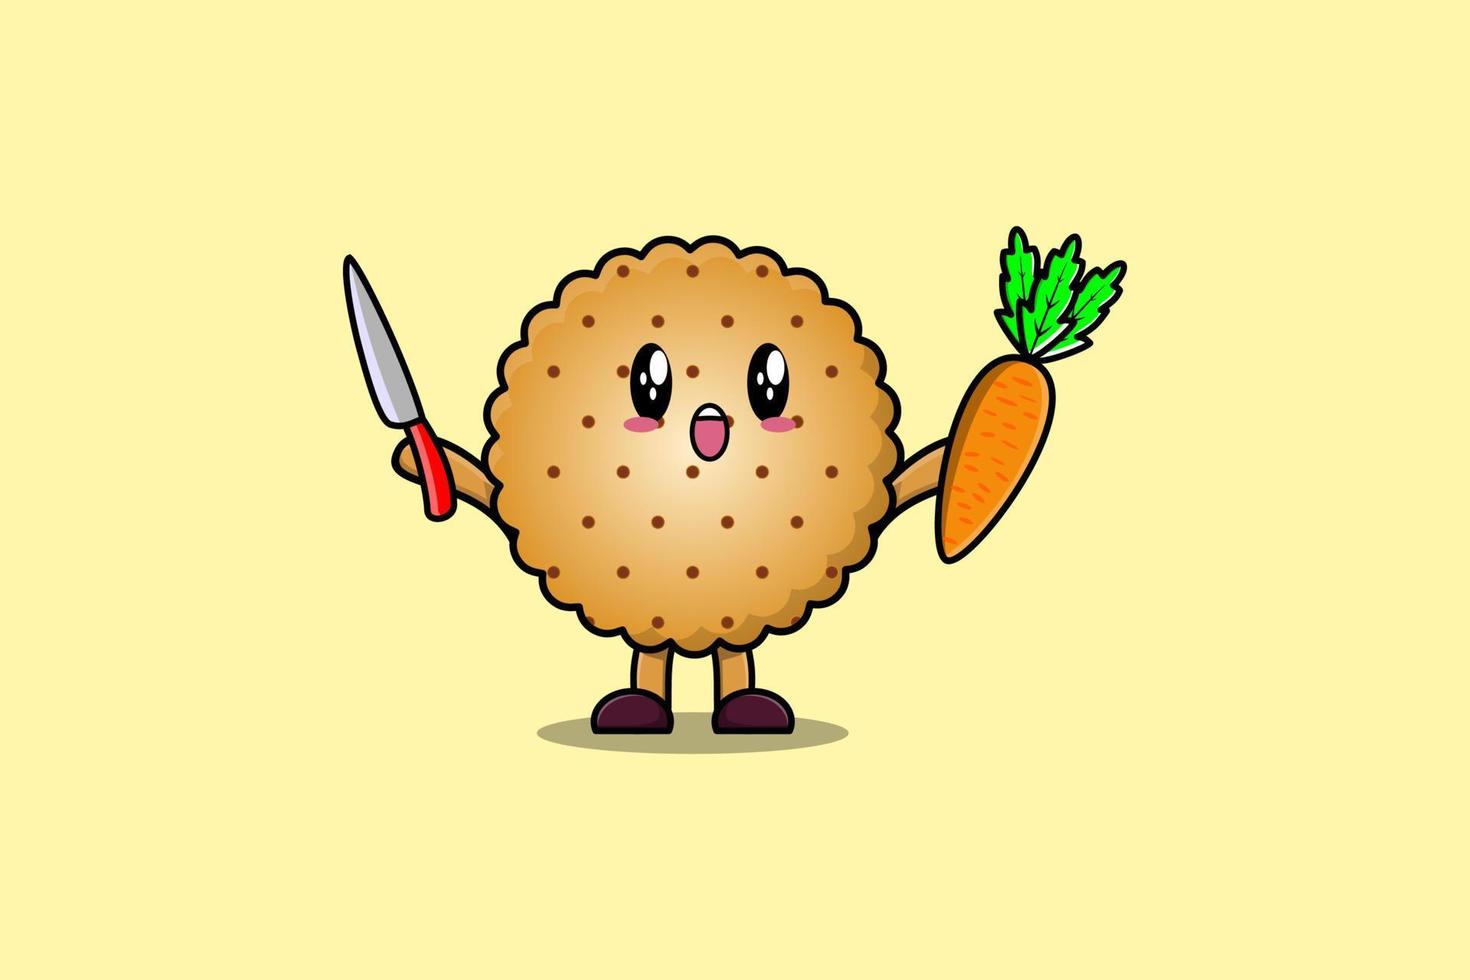 cartoon Cookies character holding knife and carrot vector